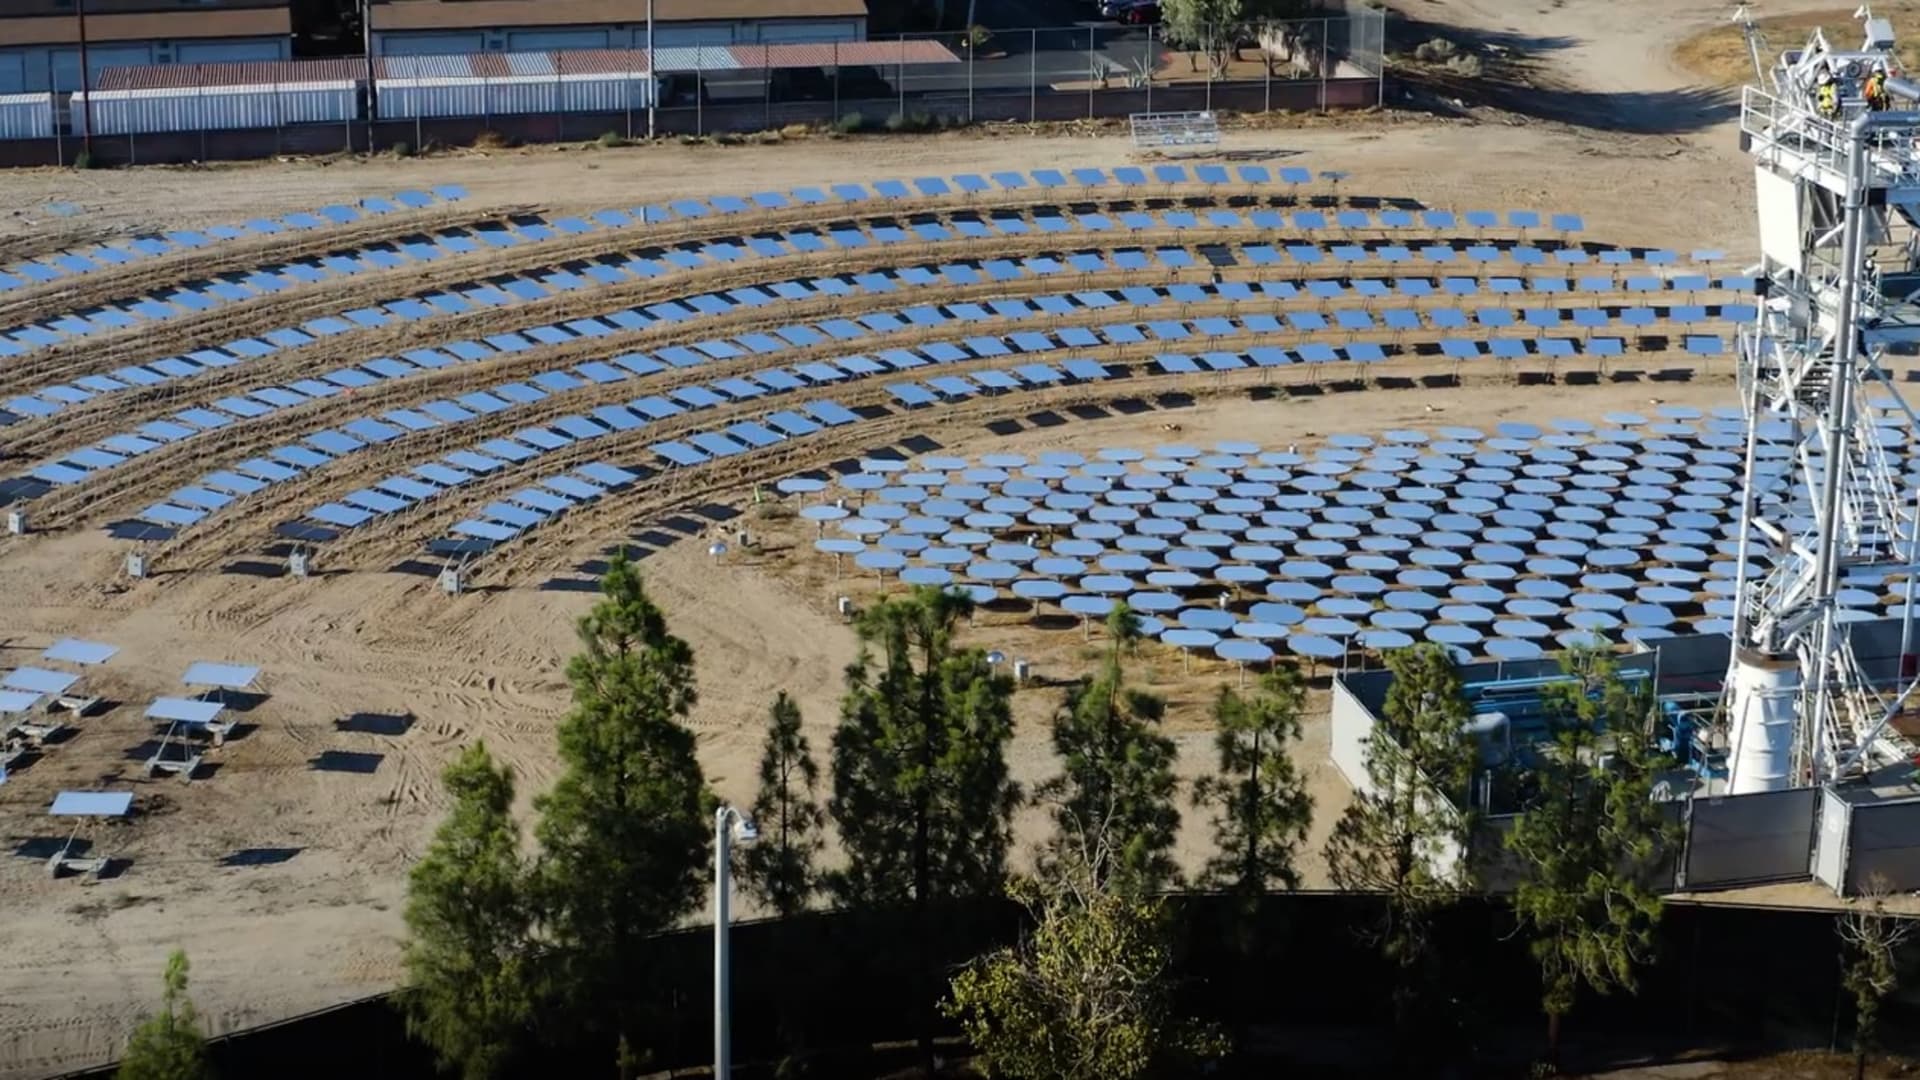 This is the demonstration project in Lancaster, Calif. of the the concentrated solar technology Heliogen is working to build and commercialize.